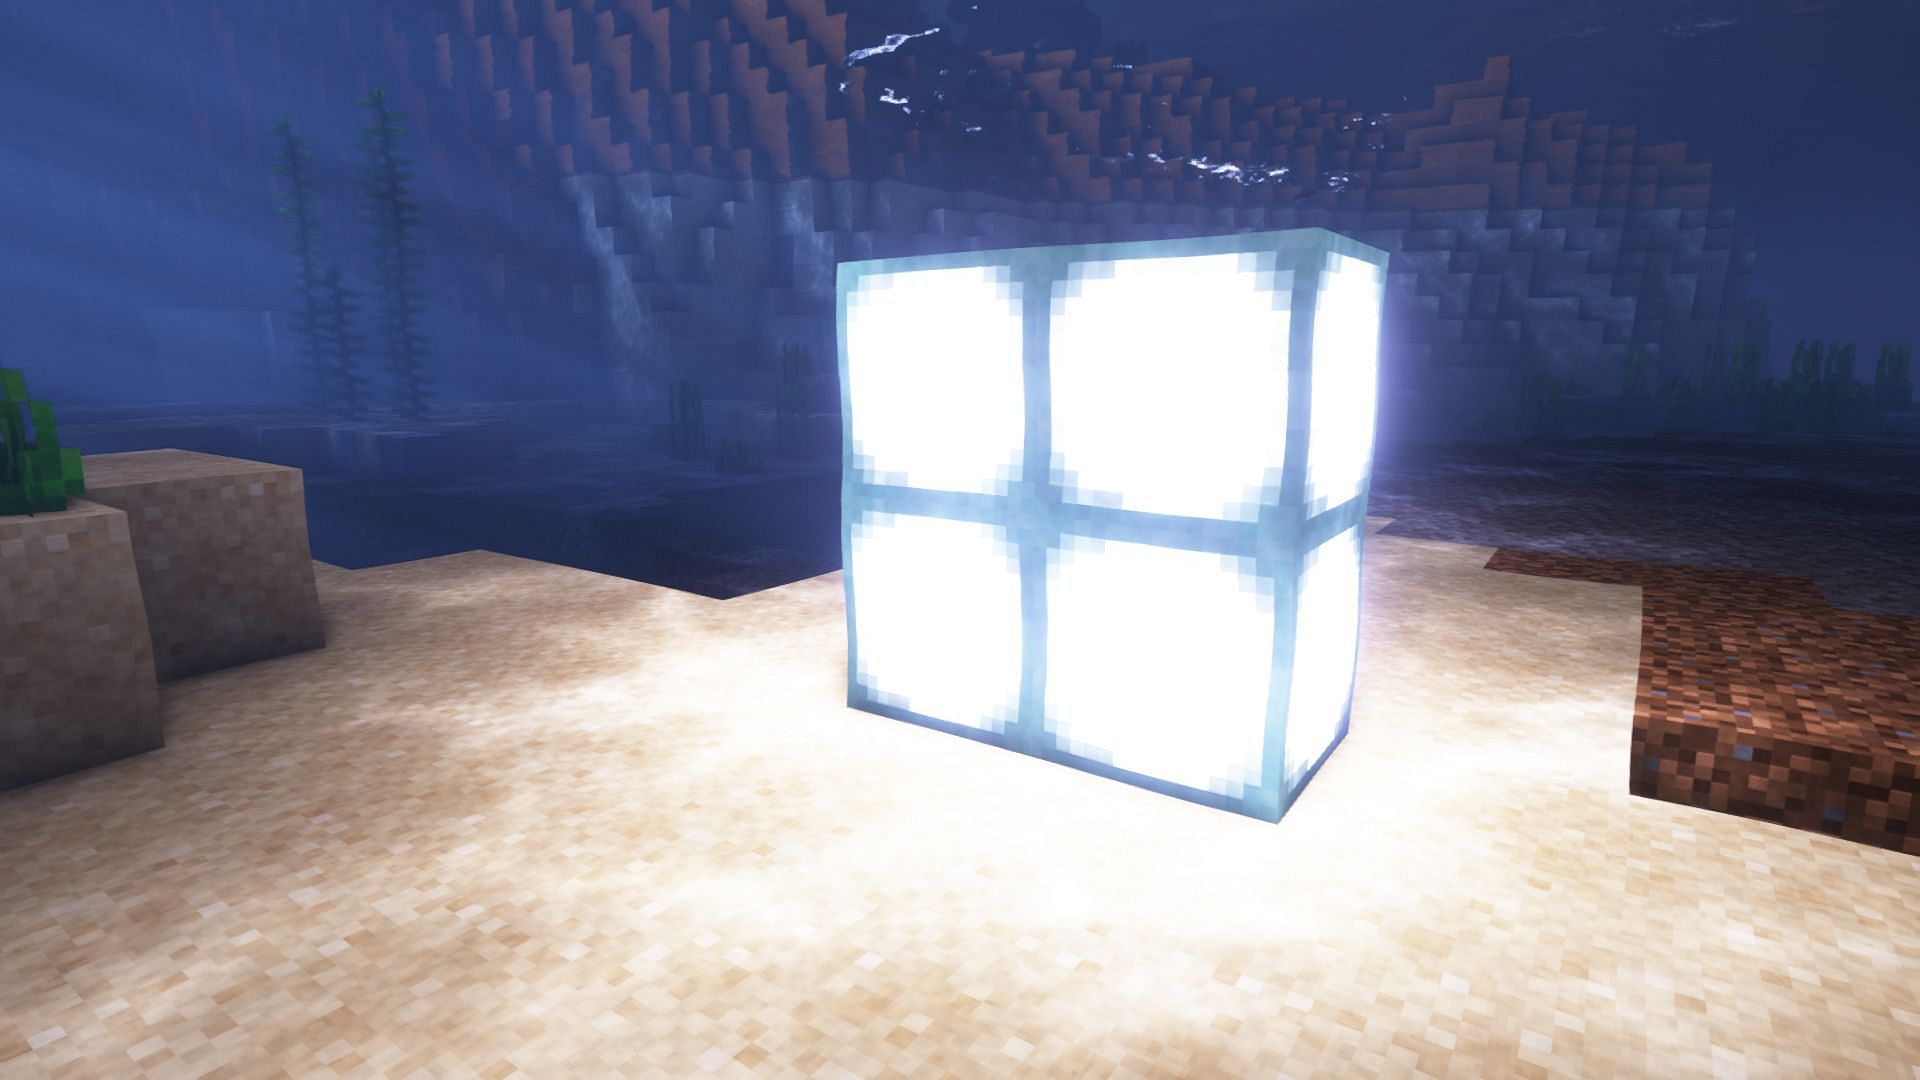 Sea lanterns can act as a primary light source for underwater builds in Minecraft (Image via Mojang)